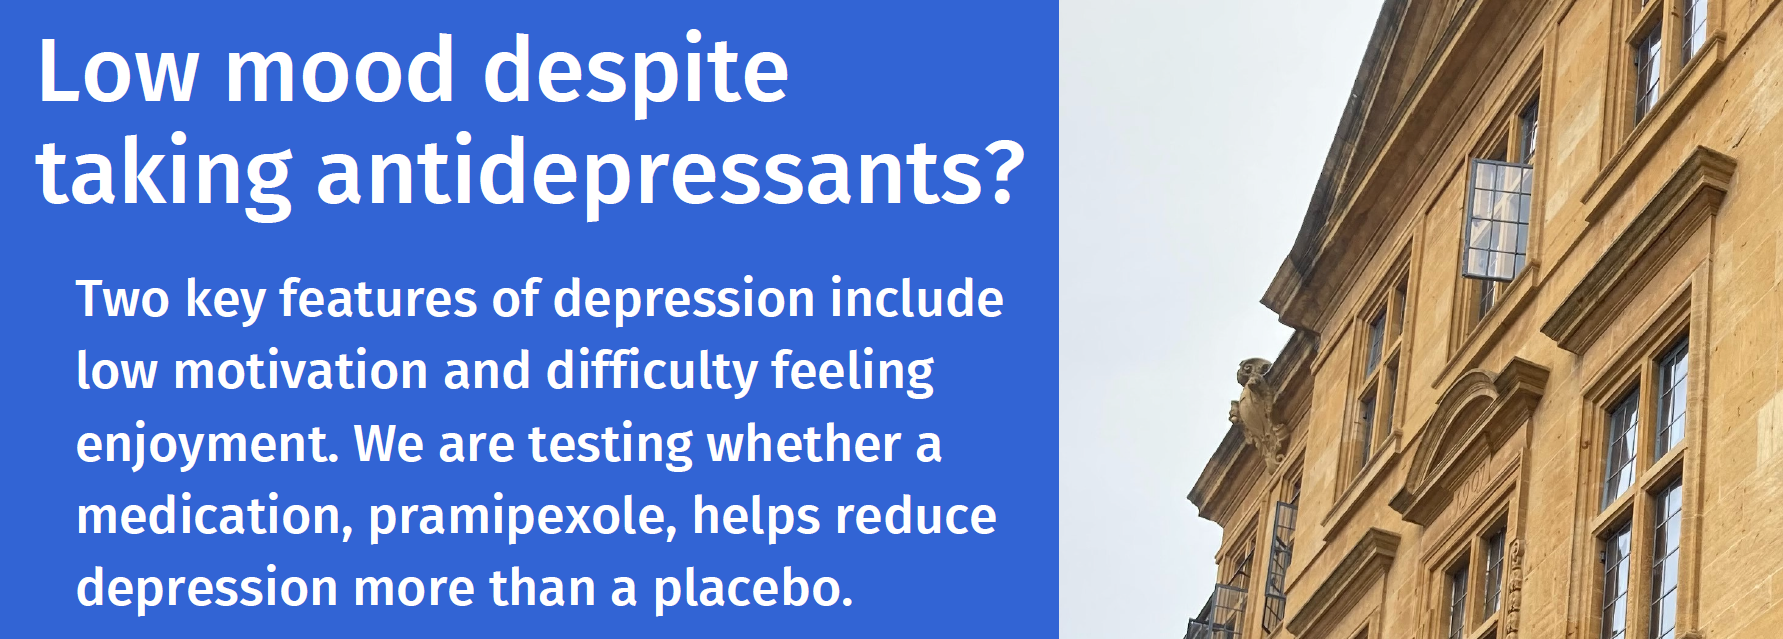 Low mood despite taking antidepressants? Two key features of depression include low motivation and difficulty feeling enjoyment. We are testing whether a medication, pramipexole, helps reduce depression more than a placebo.